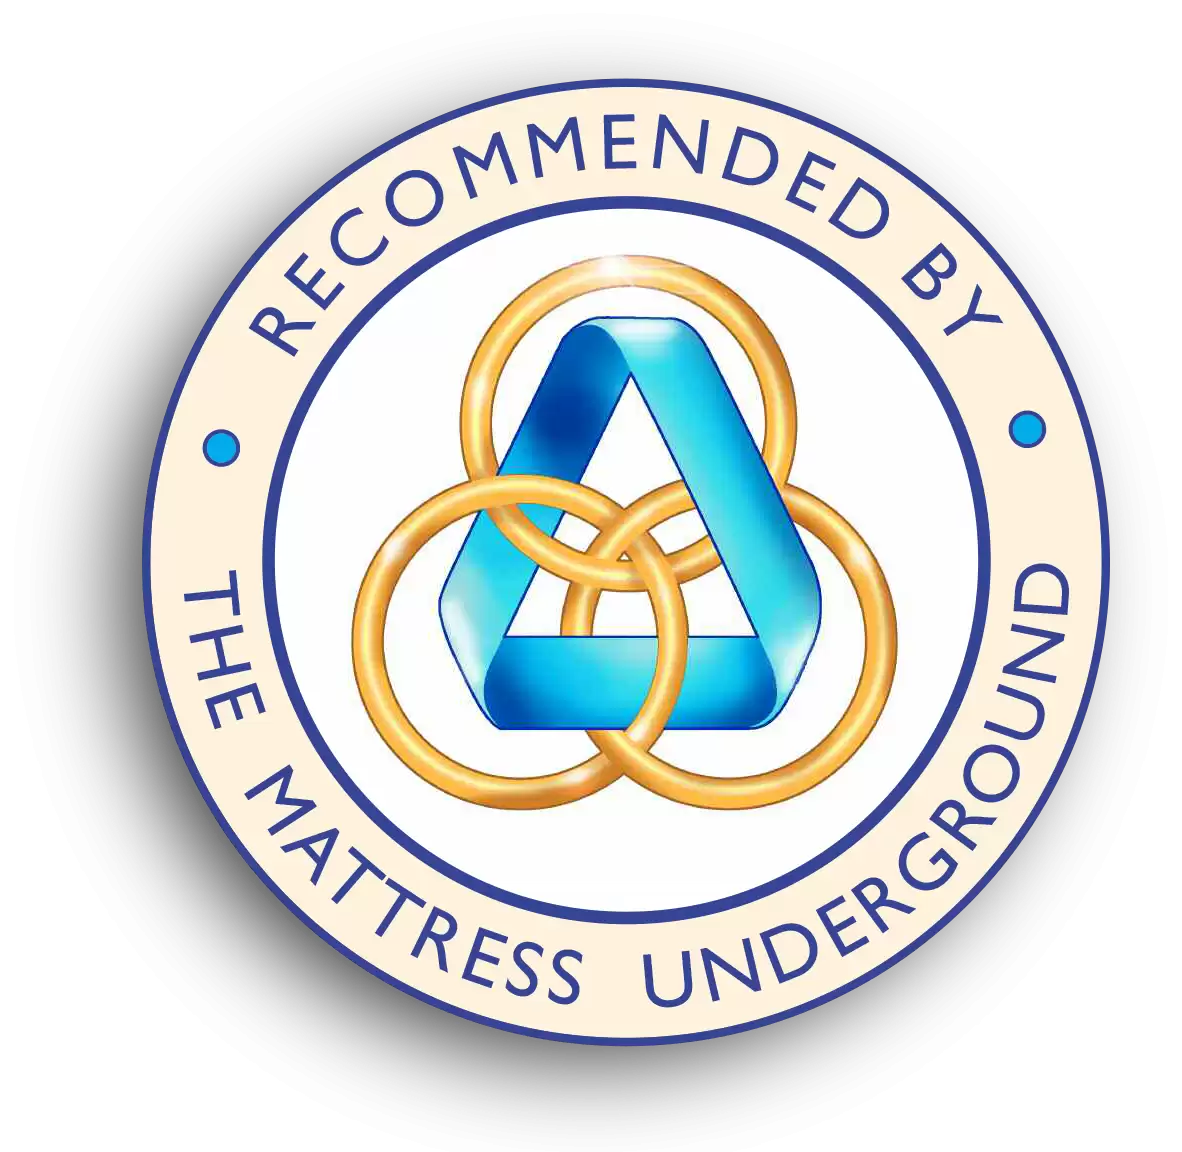 Recommended by The Mattress Underground